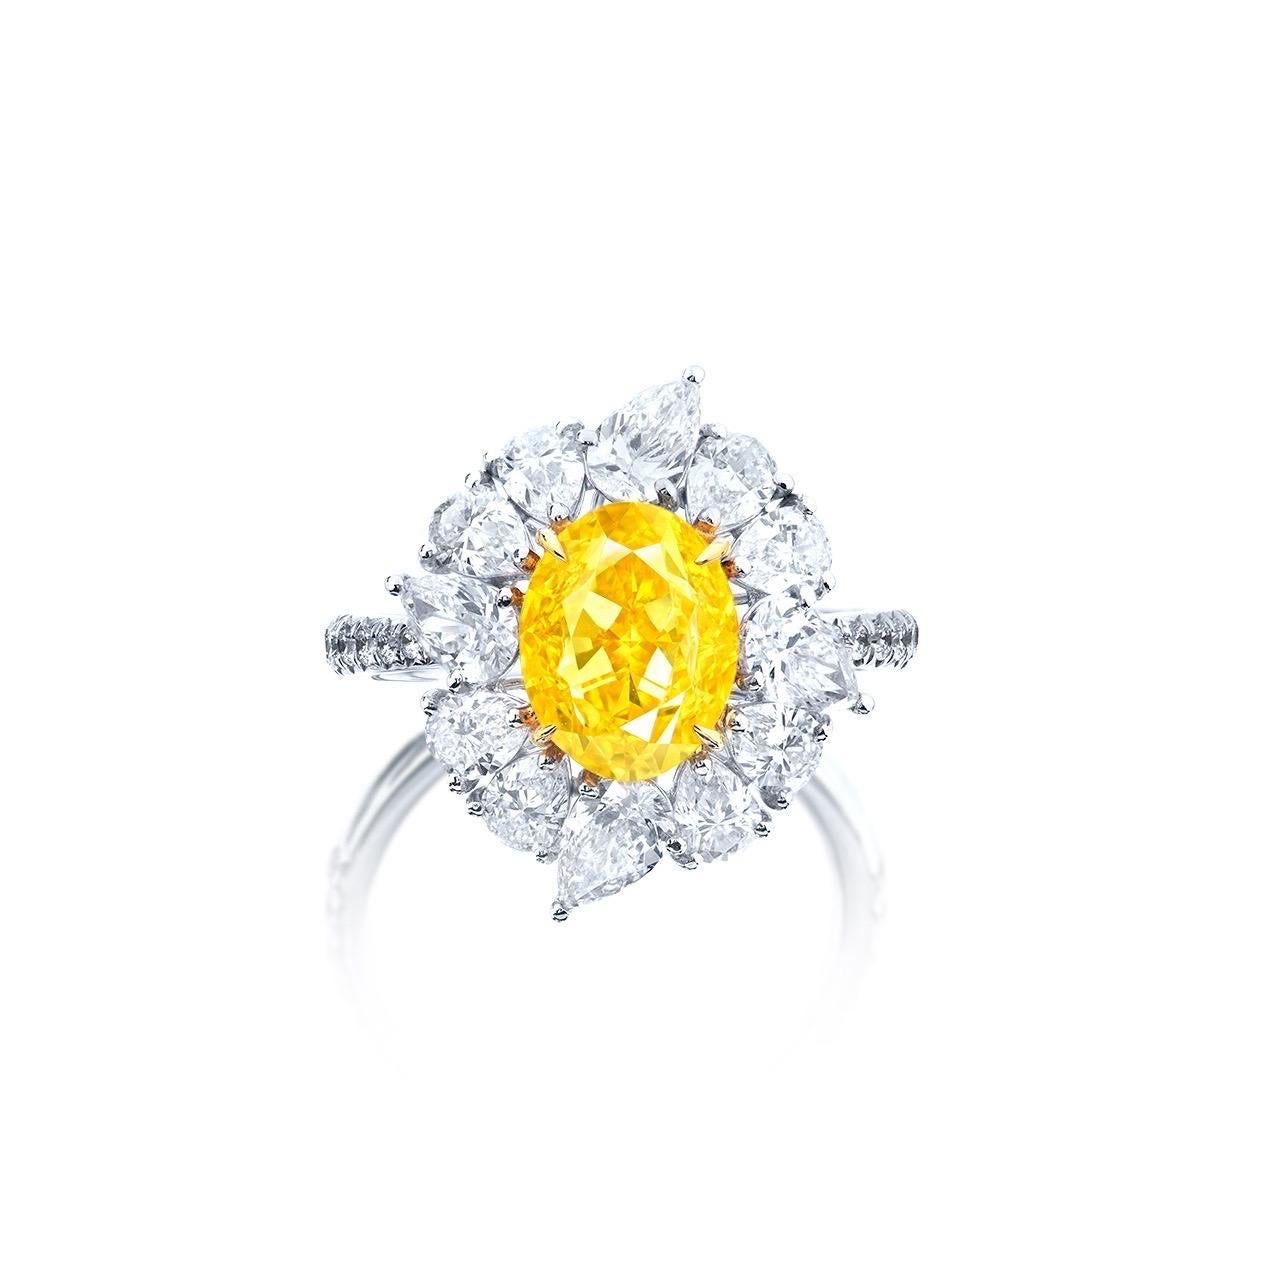 From well known dealer and wholesaler Emilio Jewelry New York, located on New York's iconic Fifth Avenue..
Center Stone: 3.00 ct Fancy Vivid Yellow OVAL Internally Flawless! 	
setting: 12 white diamonds totaling approximately 2.10 carats, 38 white